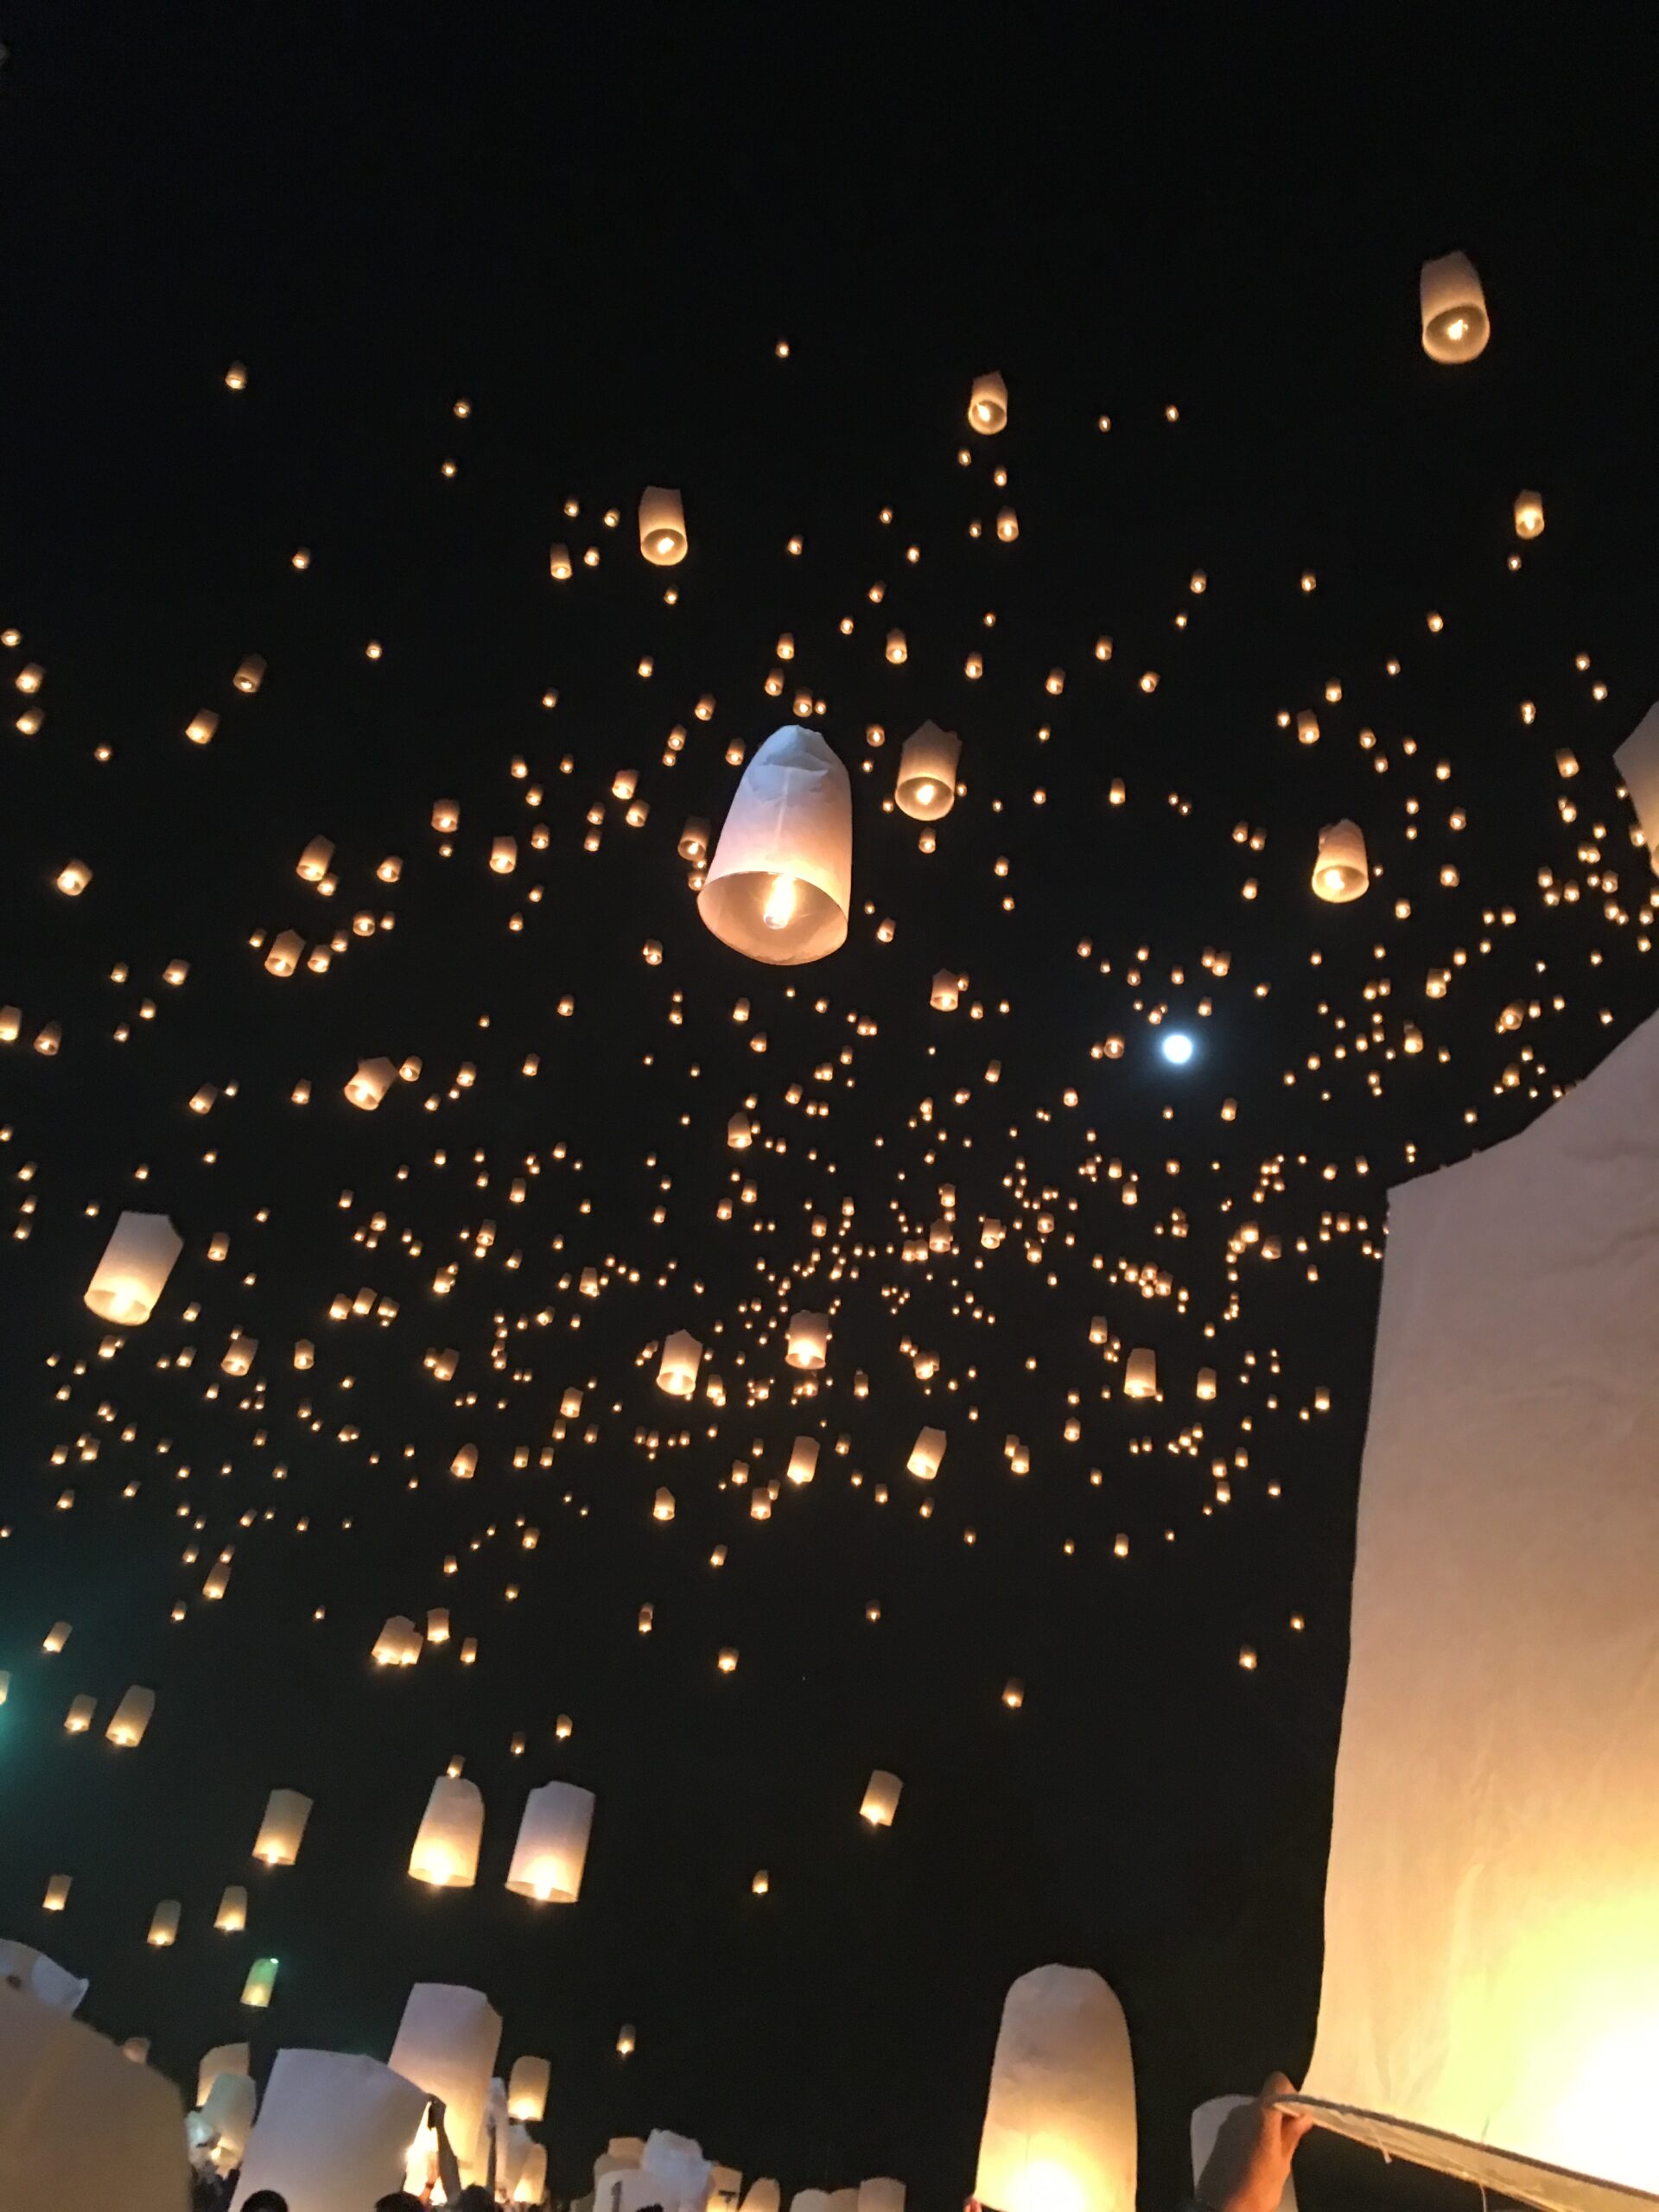 Lantern Festival in Chiang Mai, northern Thailand.